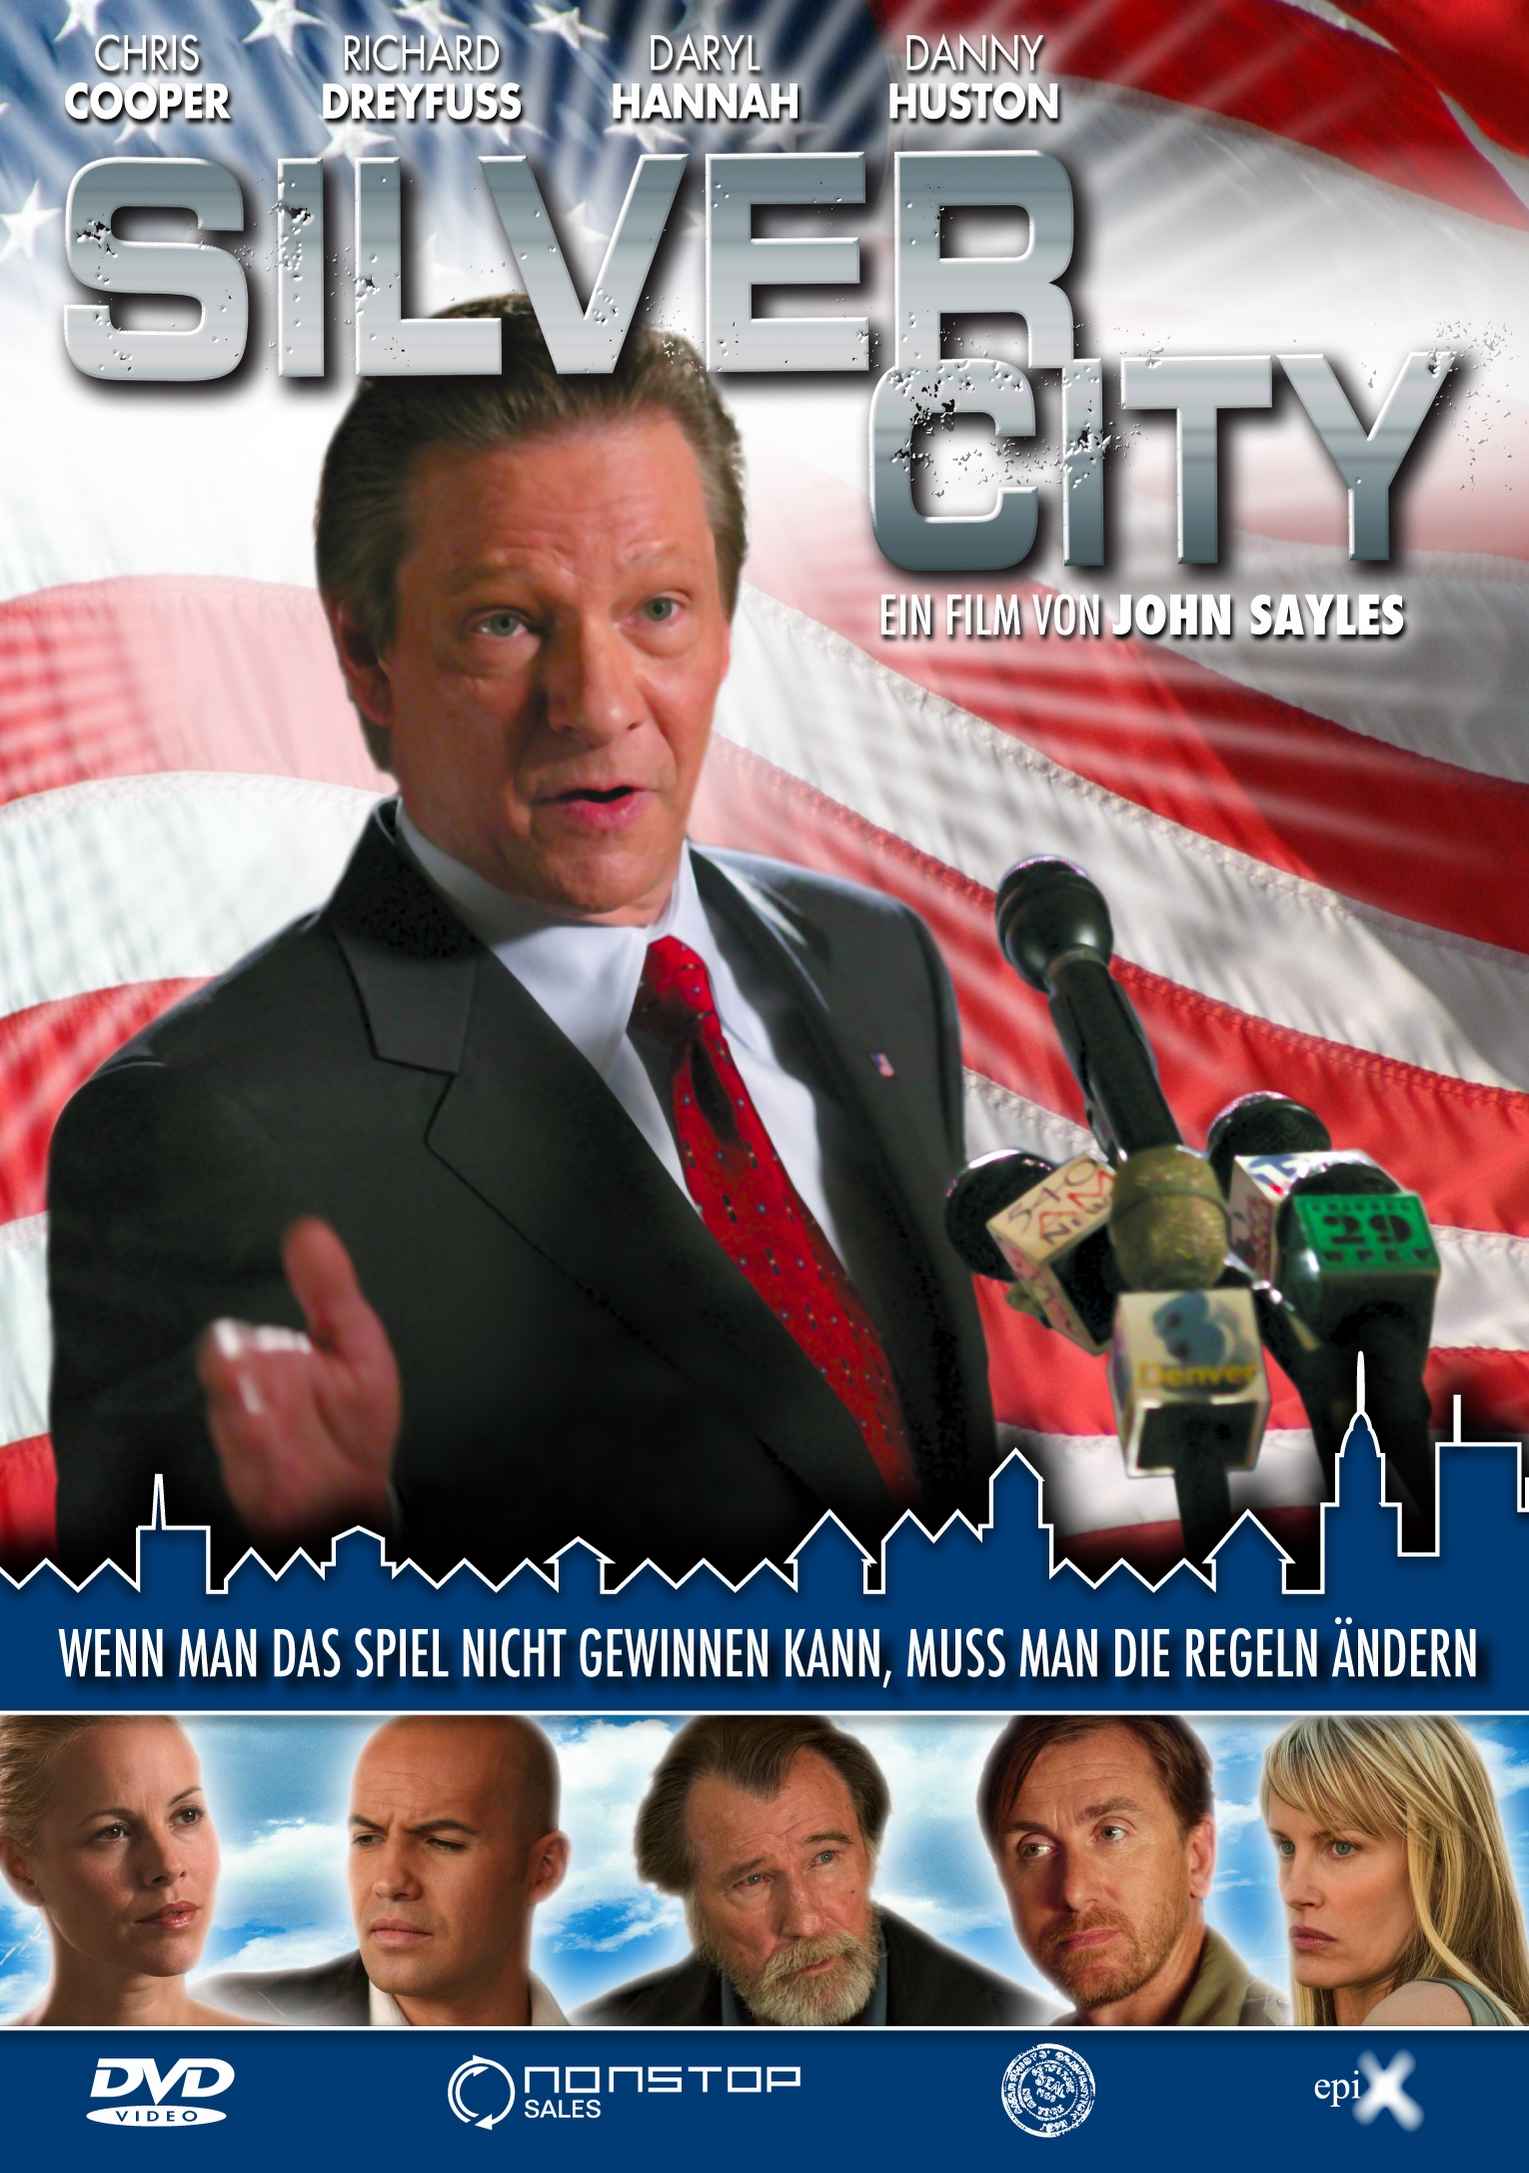 SILVER CITY Frontcover FINAL